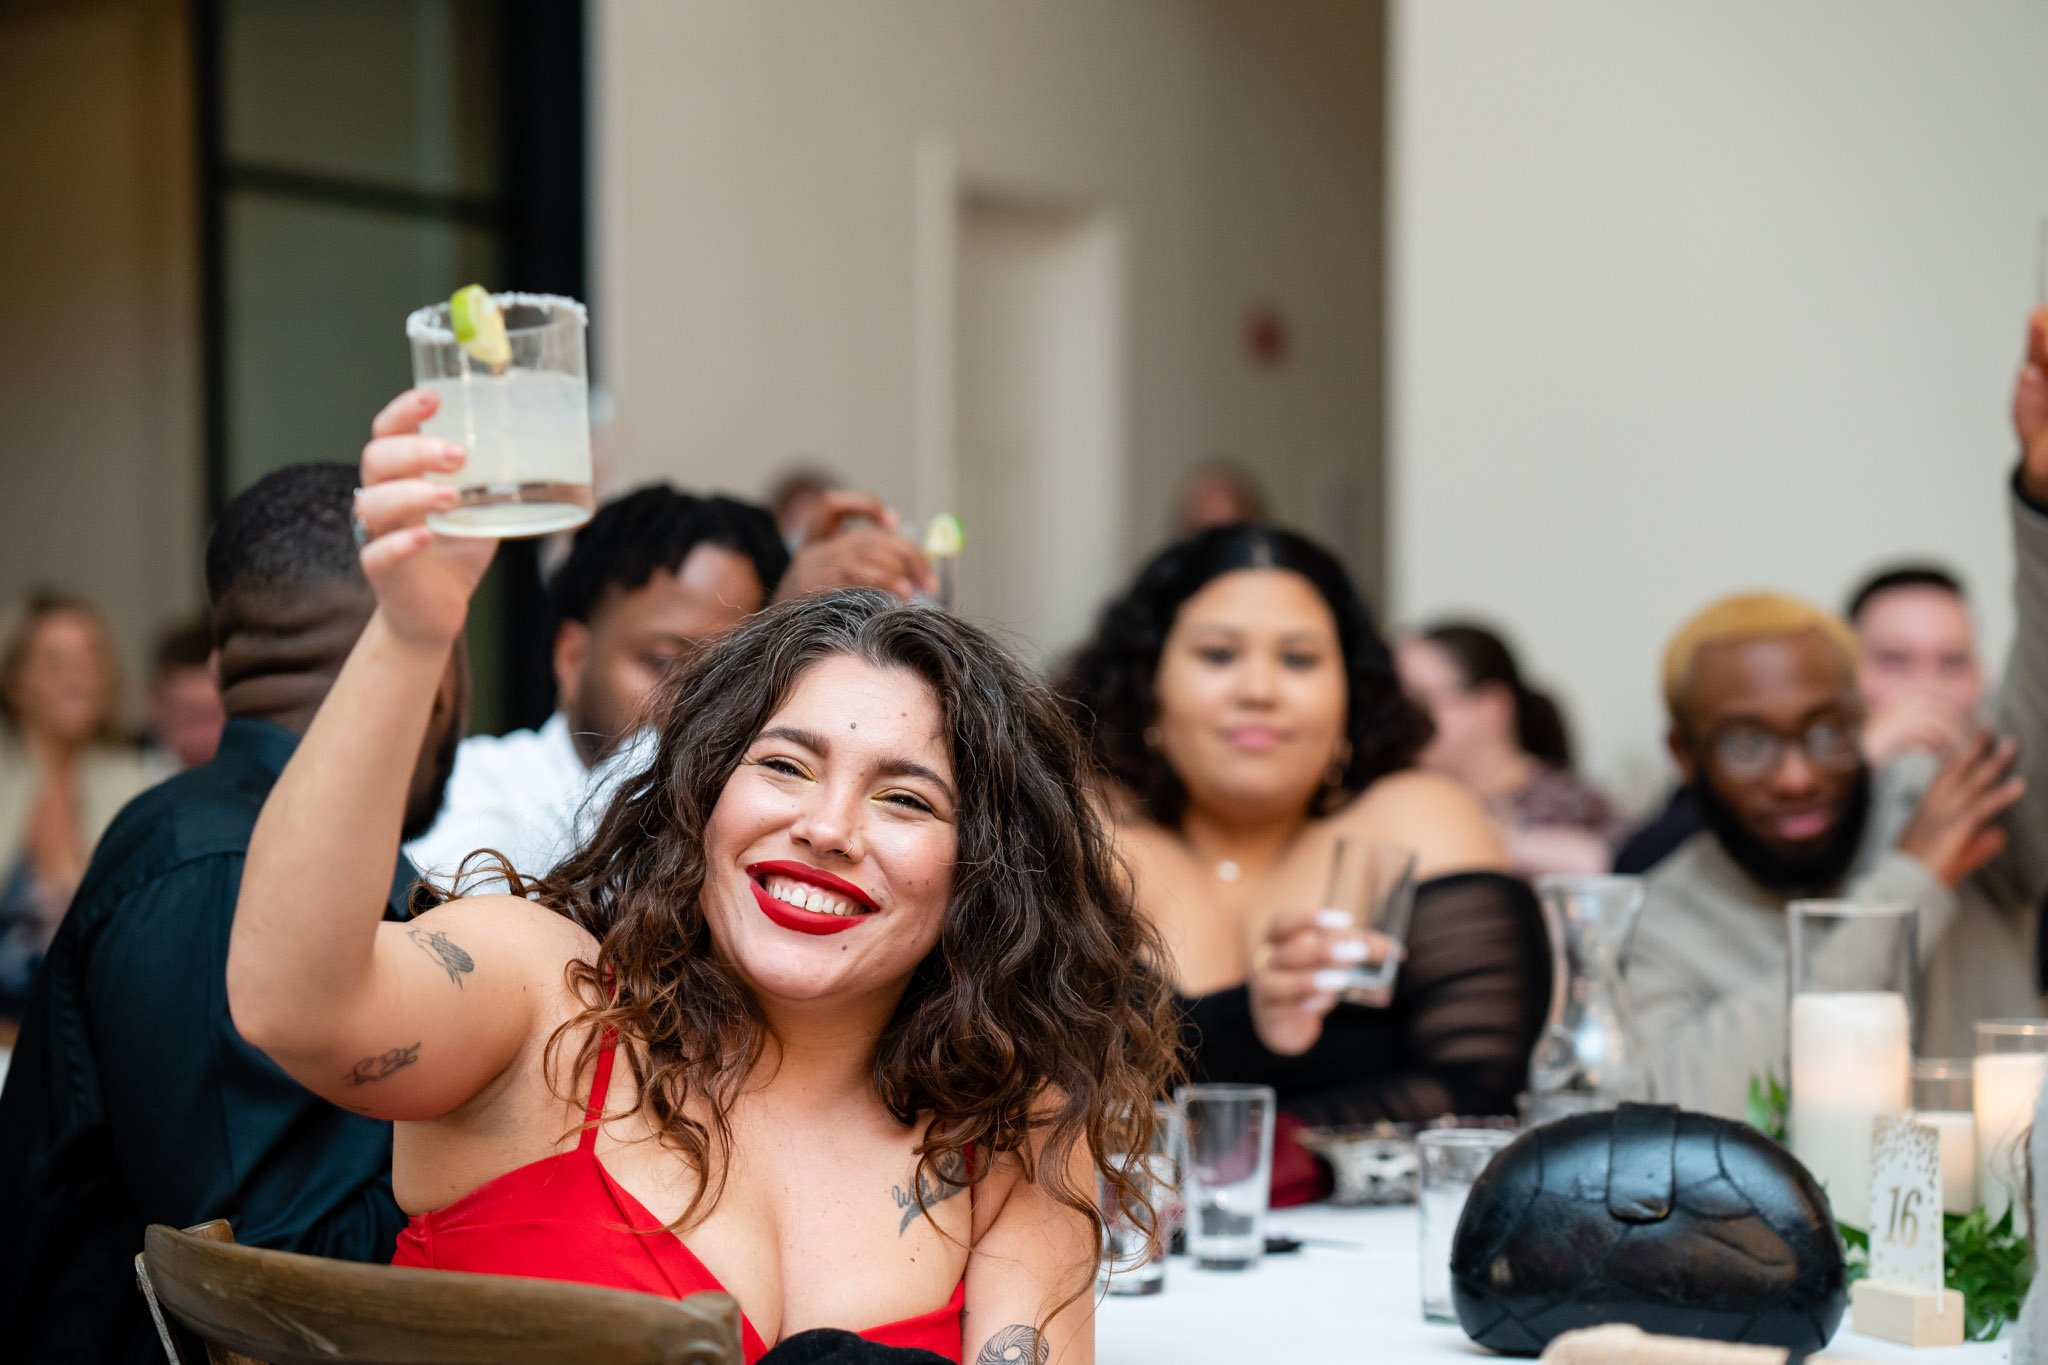 A wedding guest in a red dress raises a glass at the Arlo in Texas The Amber Studio